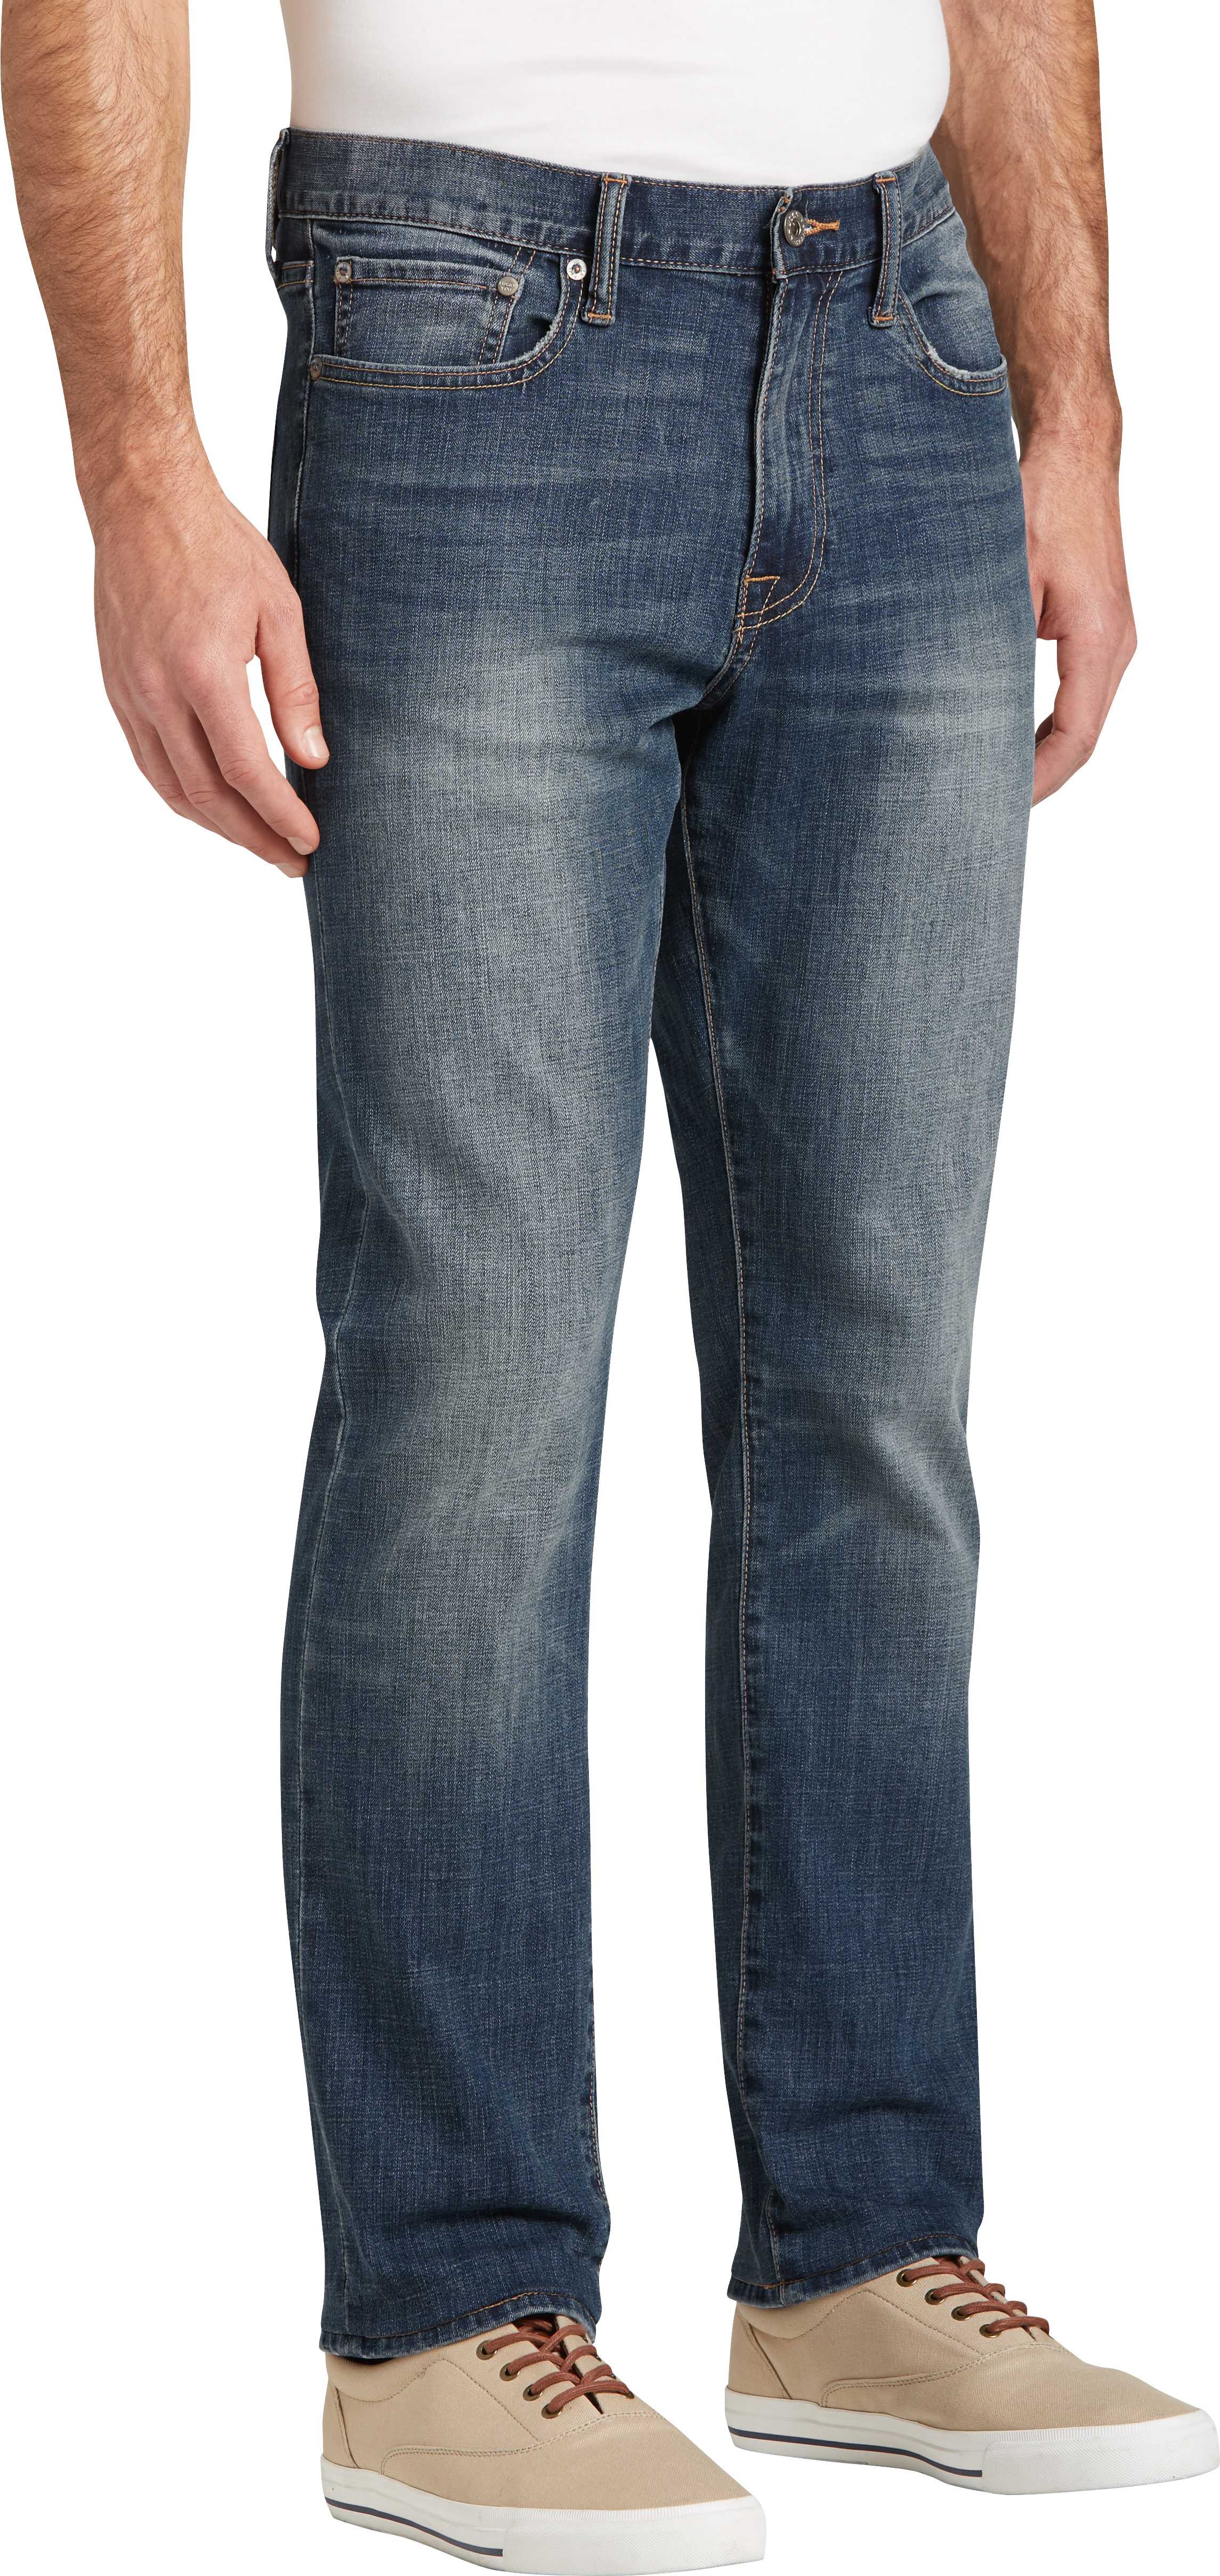 Lucky Brand 329 Classic Fit Dark Wash Jeans, Whispering Pines